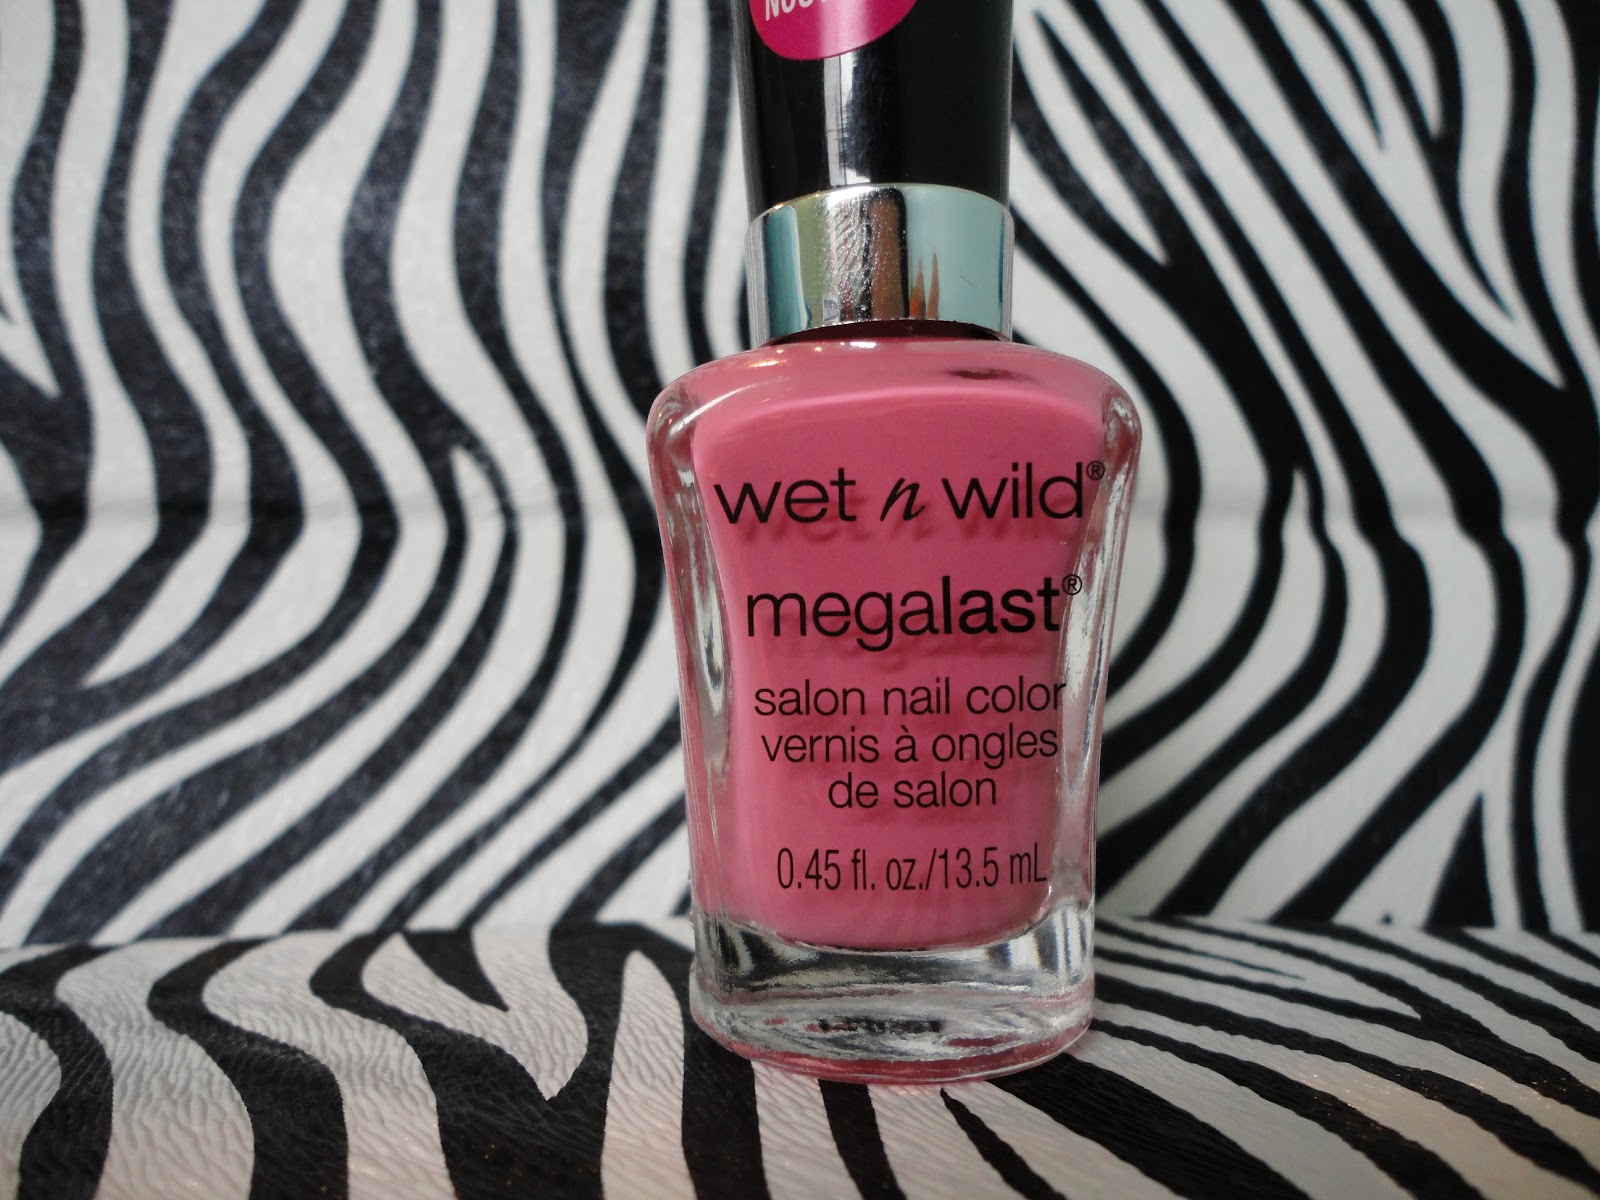 Wet n Wild Megalast Nail Polish in "Candy-licious" - wide 11